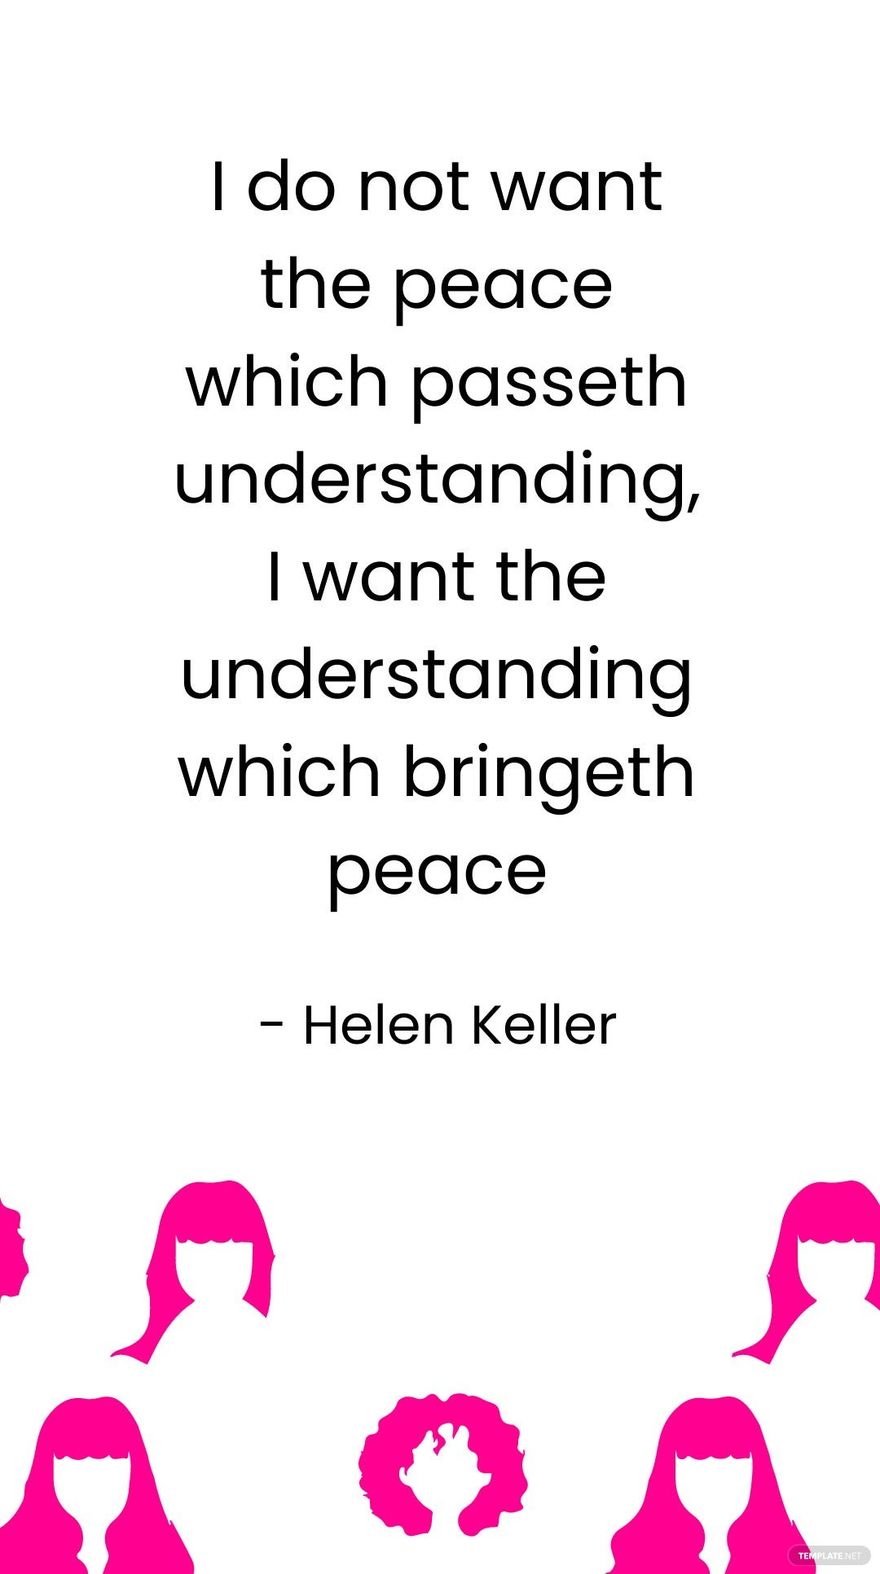 Helen Keller - I do not want the peace which passeth understanding, I want the understanding which bringeth peace